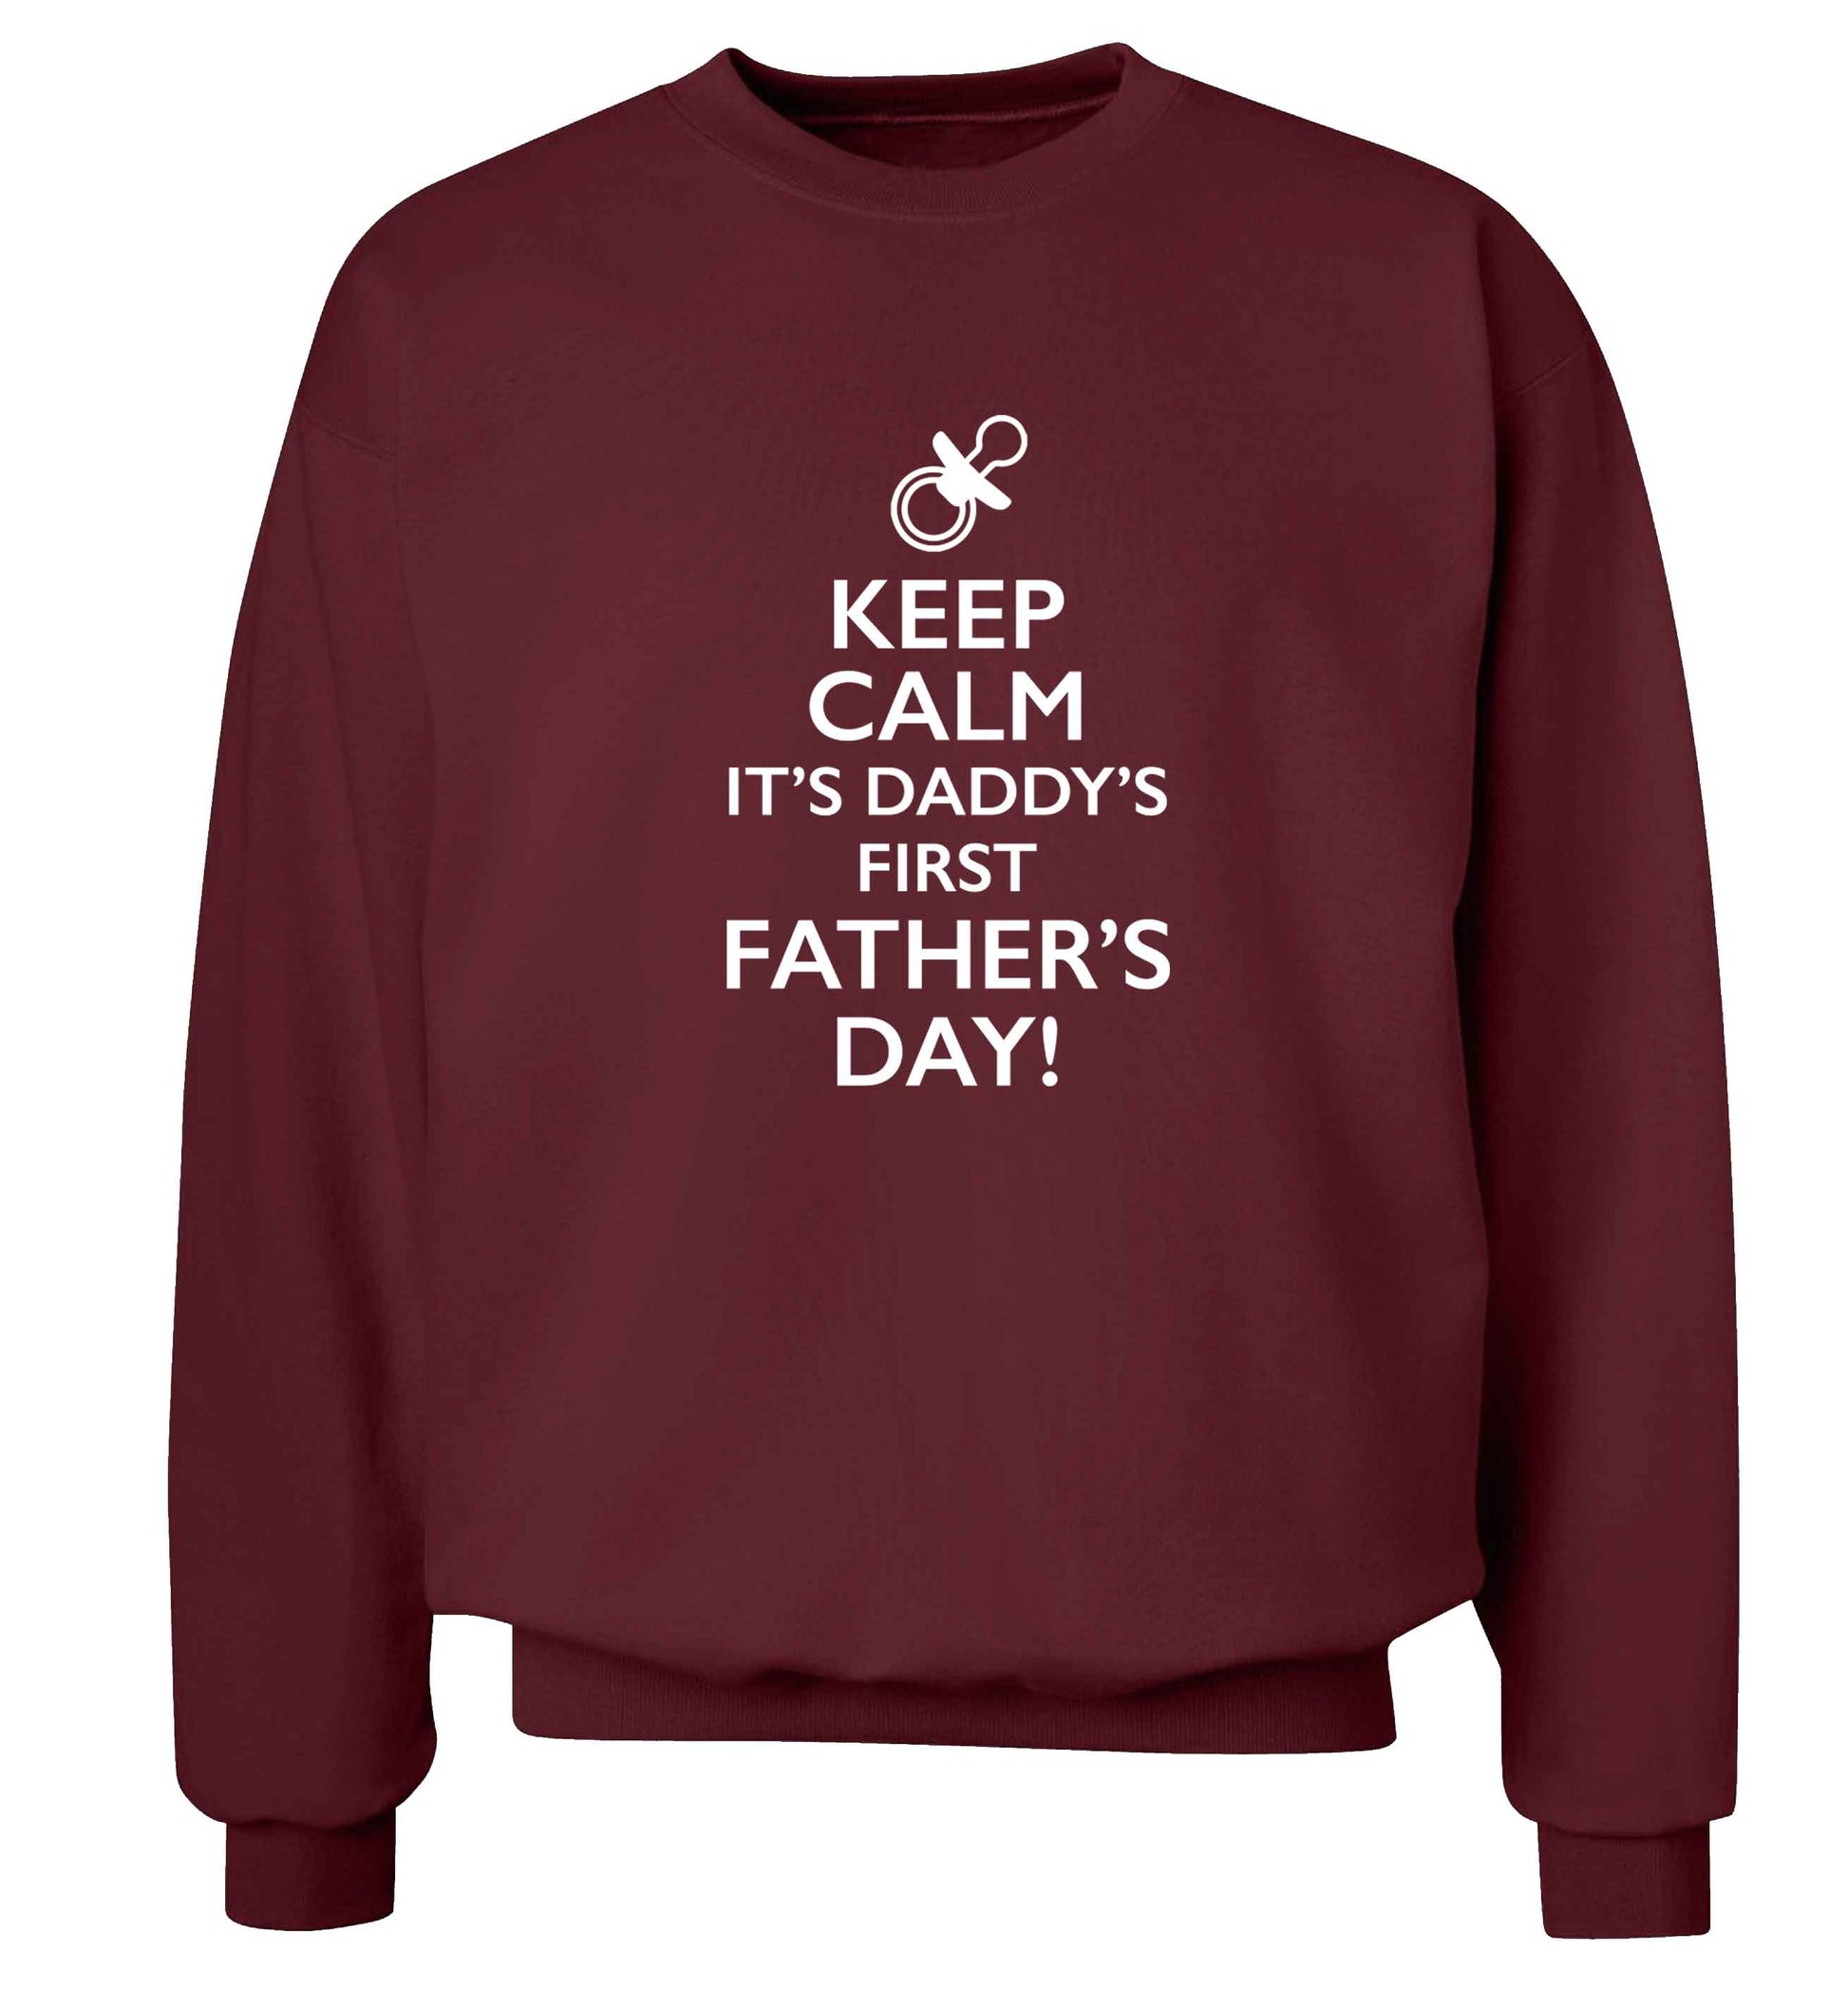 Keep calm it's daddys first father's day adult's unisex maroon sweater 2XL